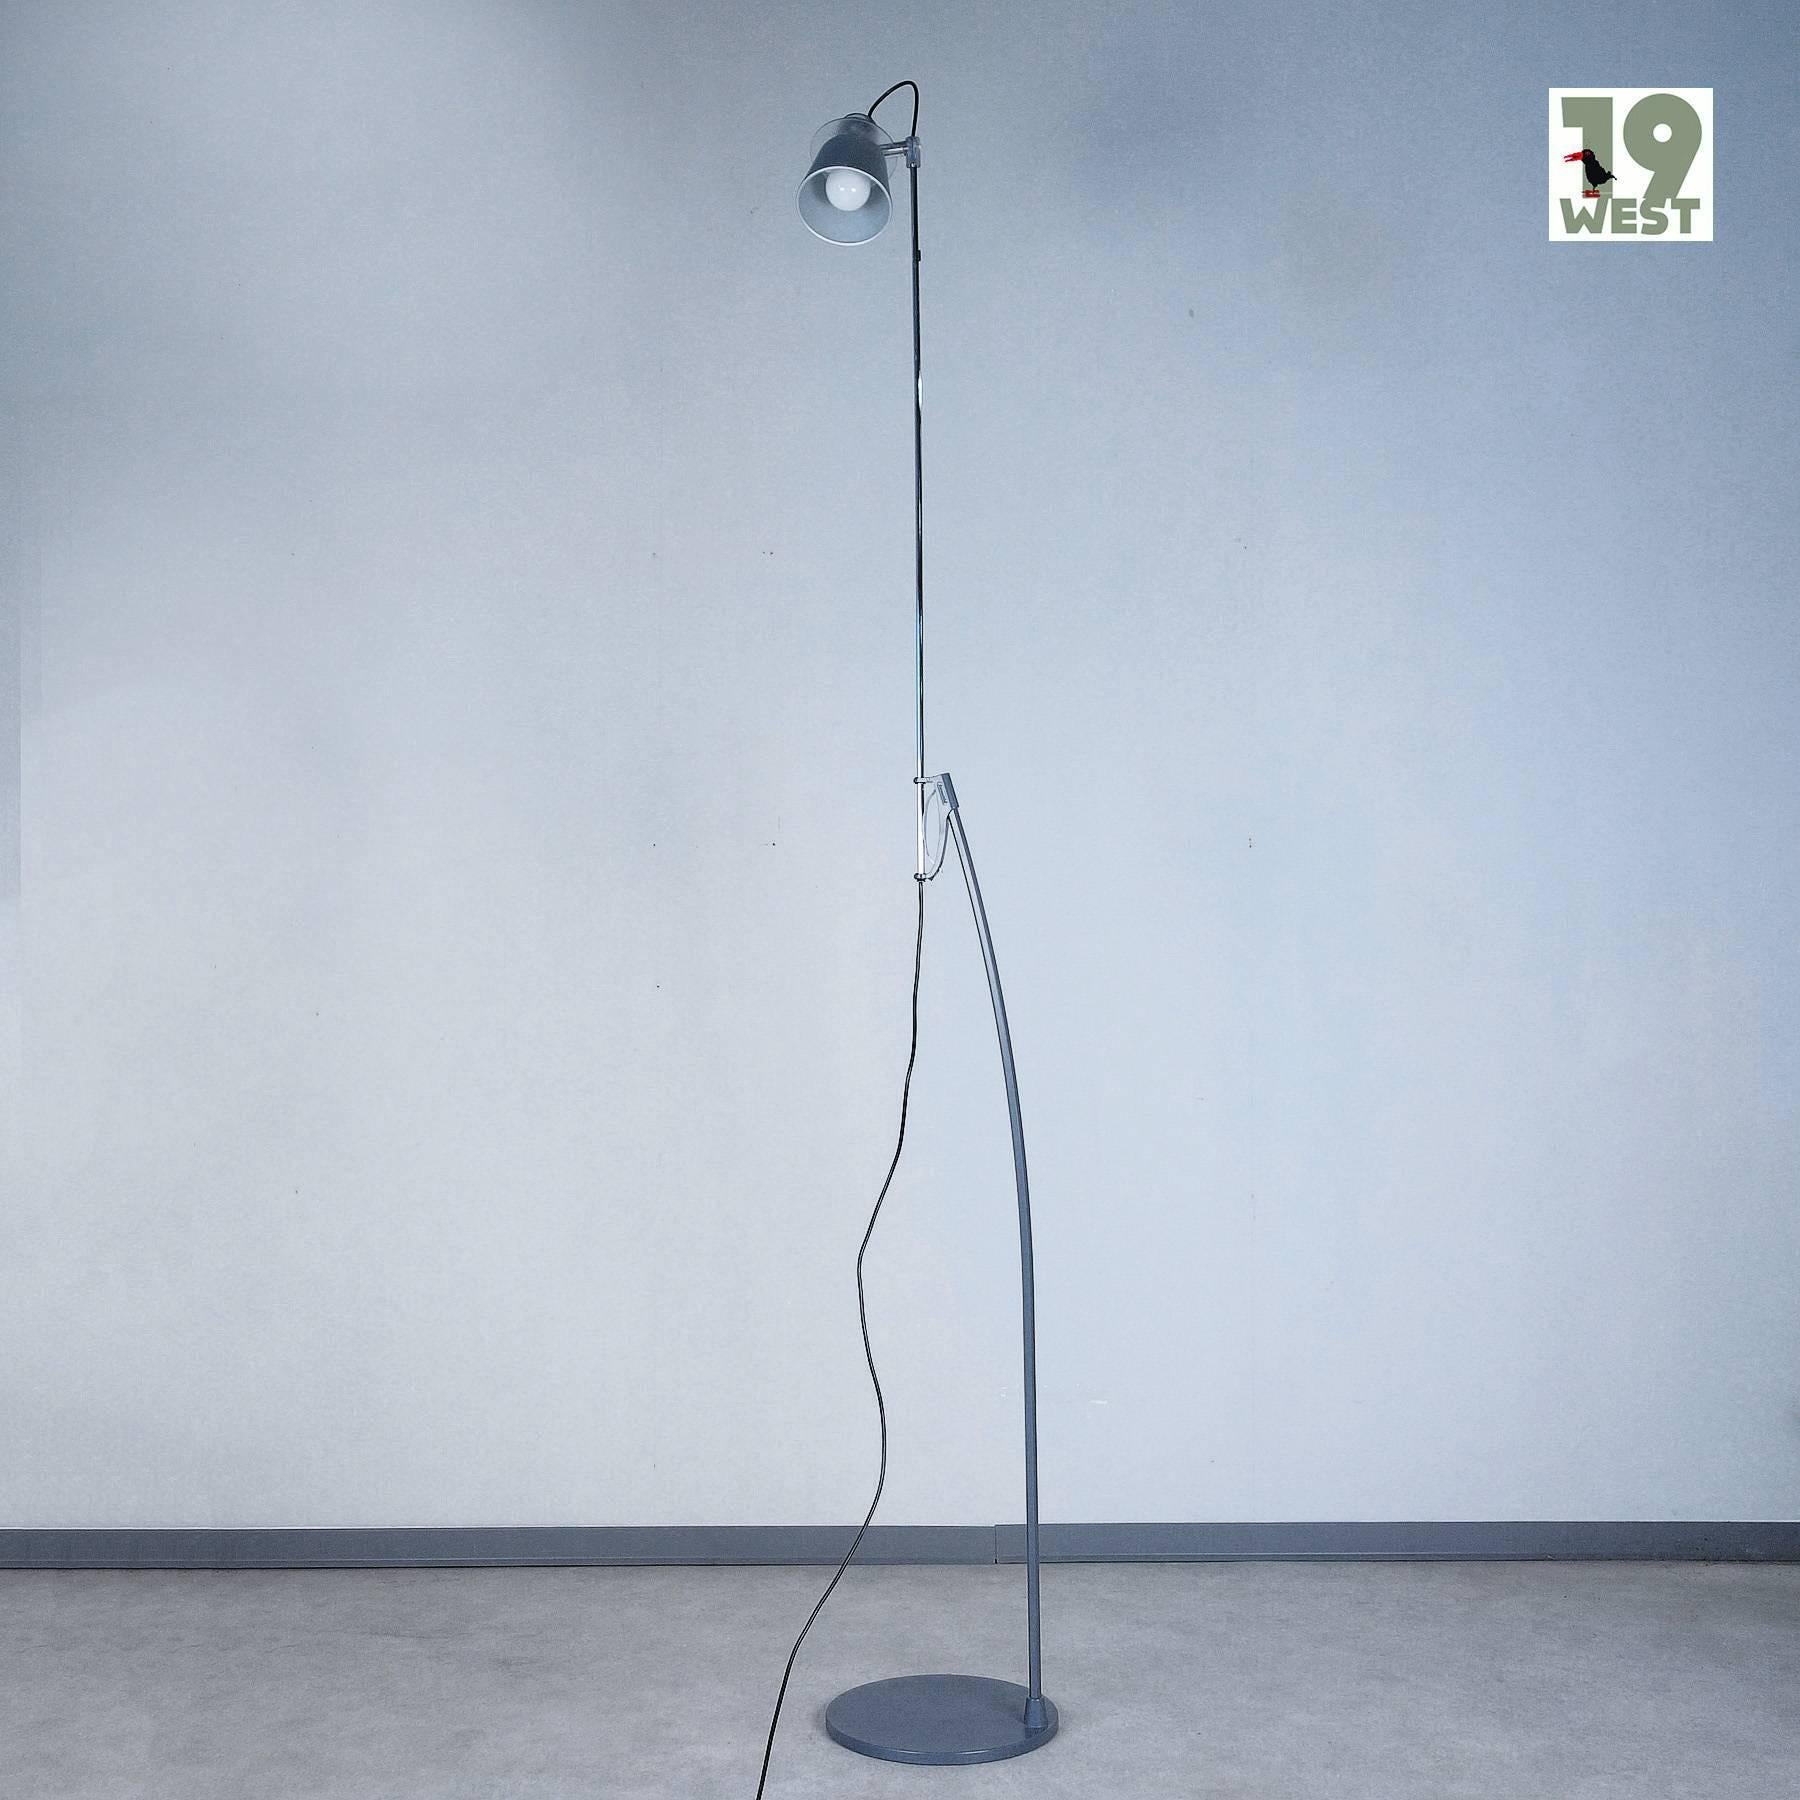 Alfiere floor lamp, designed in the 1990s by Enzo Mari, manufactured in Italy by Artemide. The Luminaire stands out for its filigree design and its variability: it can be adjusted to a height of up to 219 cm (!) and the shade can be adjusted